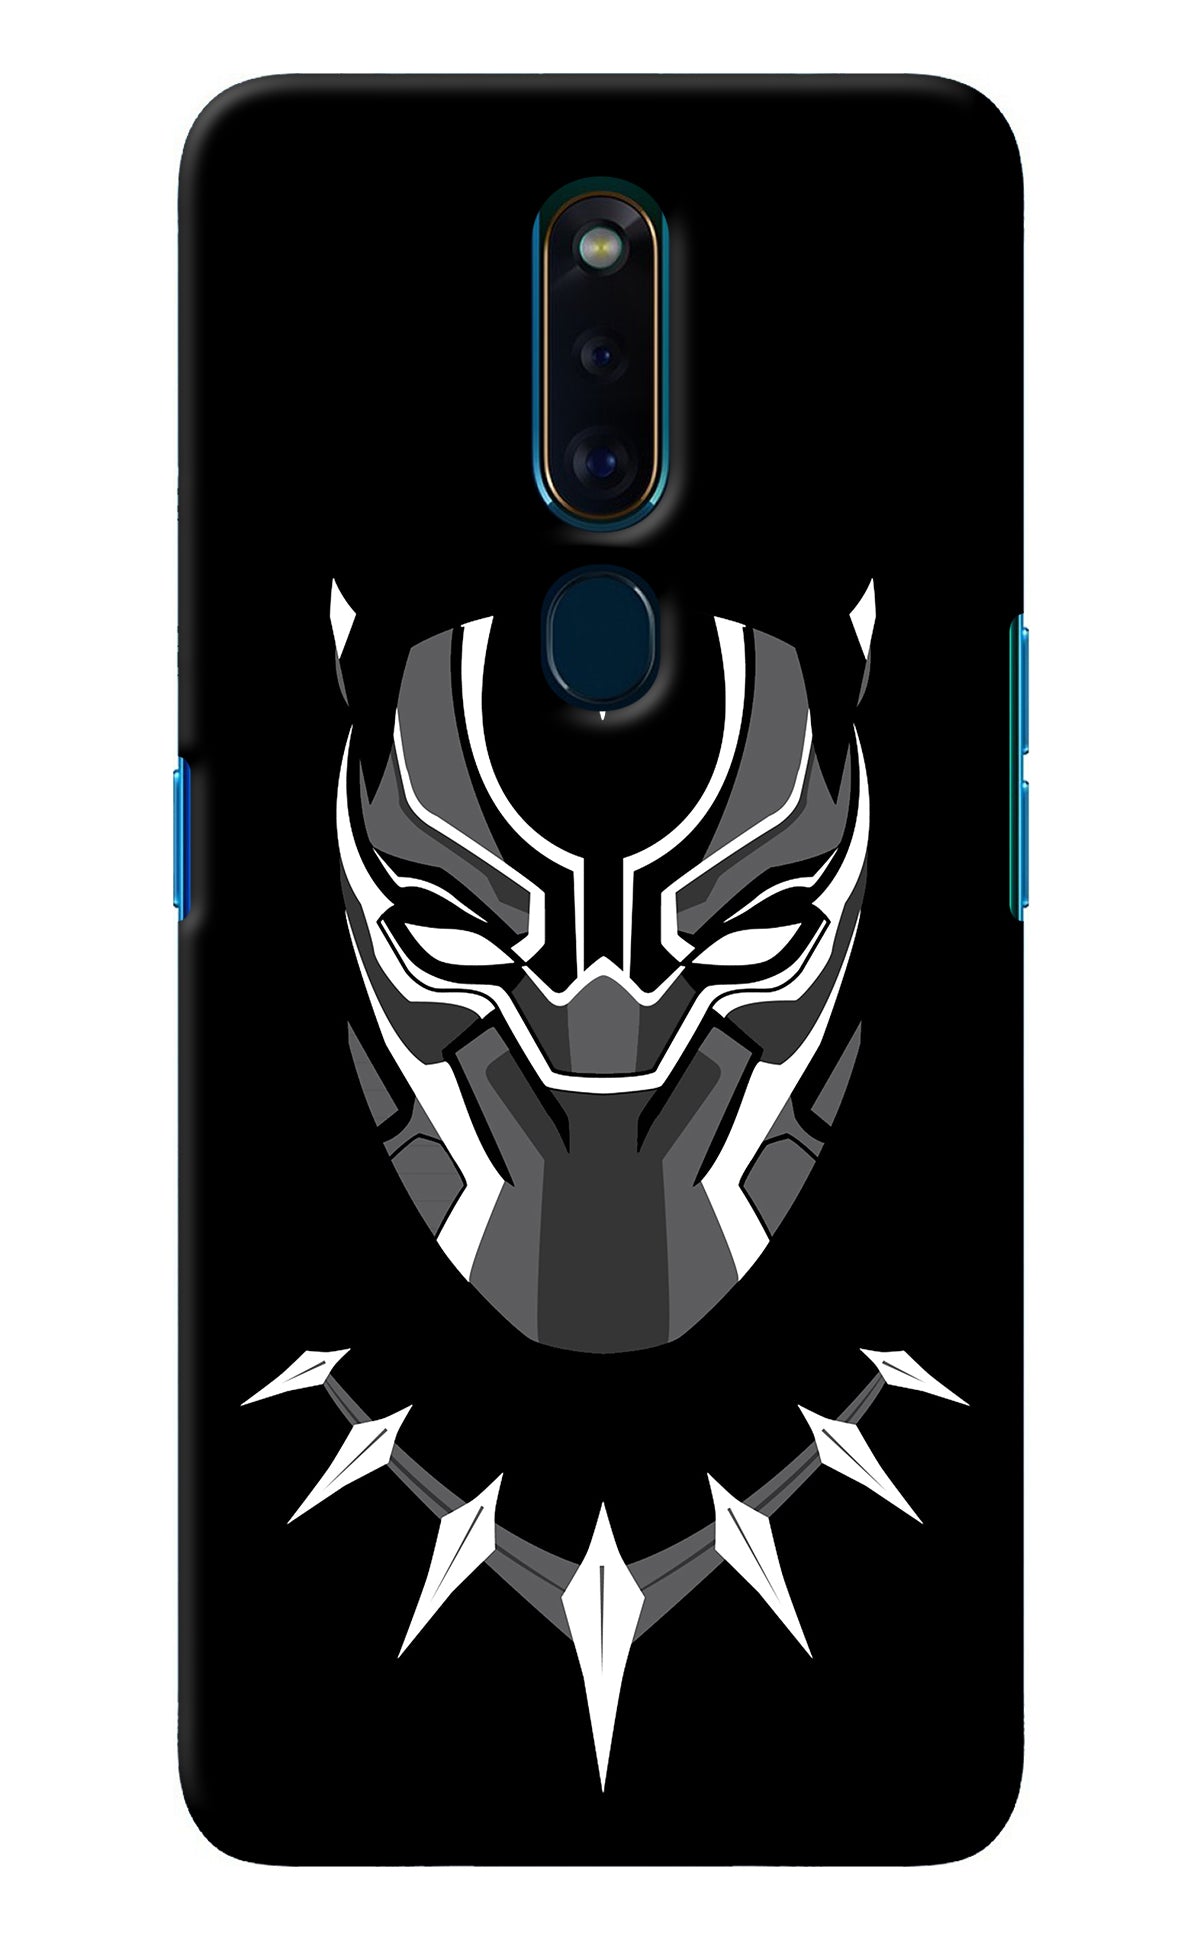 Black Panther Oppo F11 Pro Back Cover